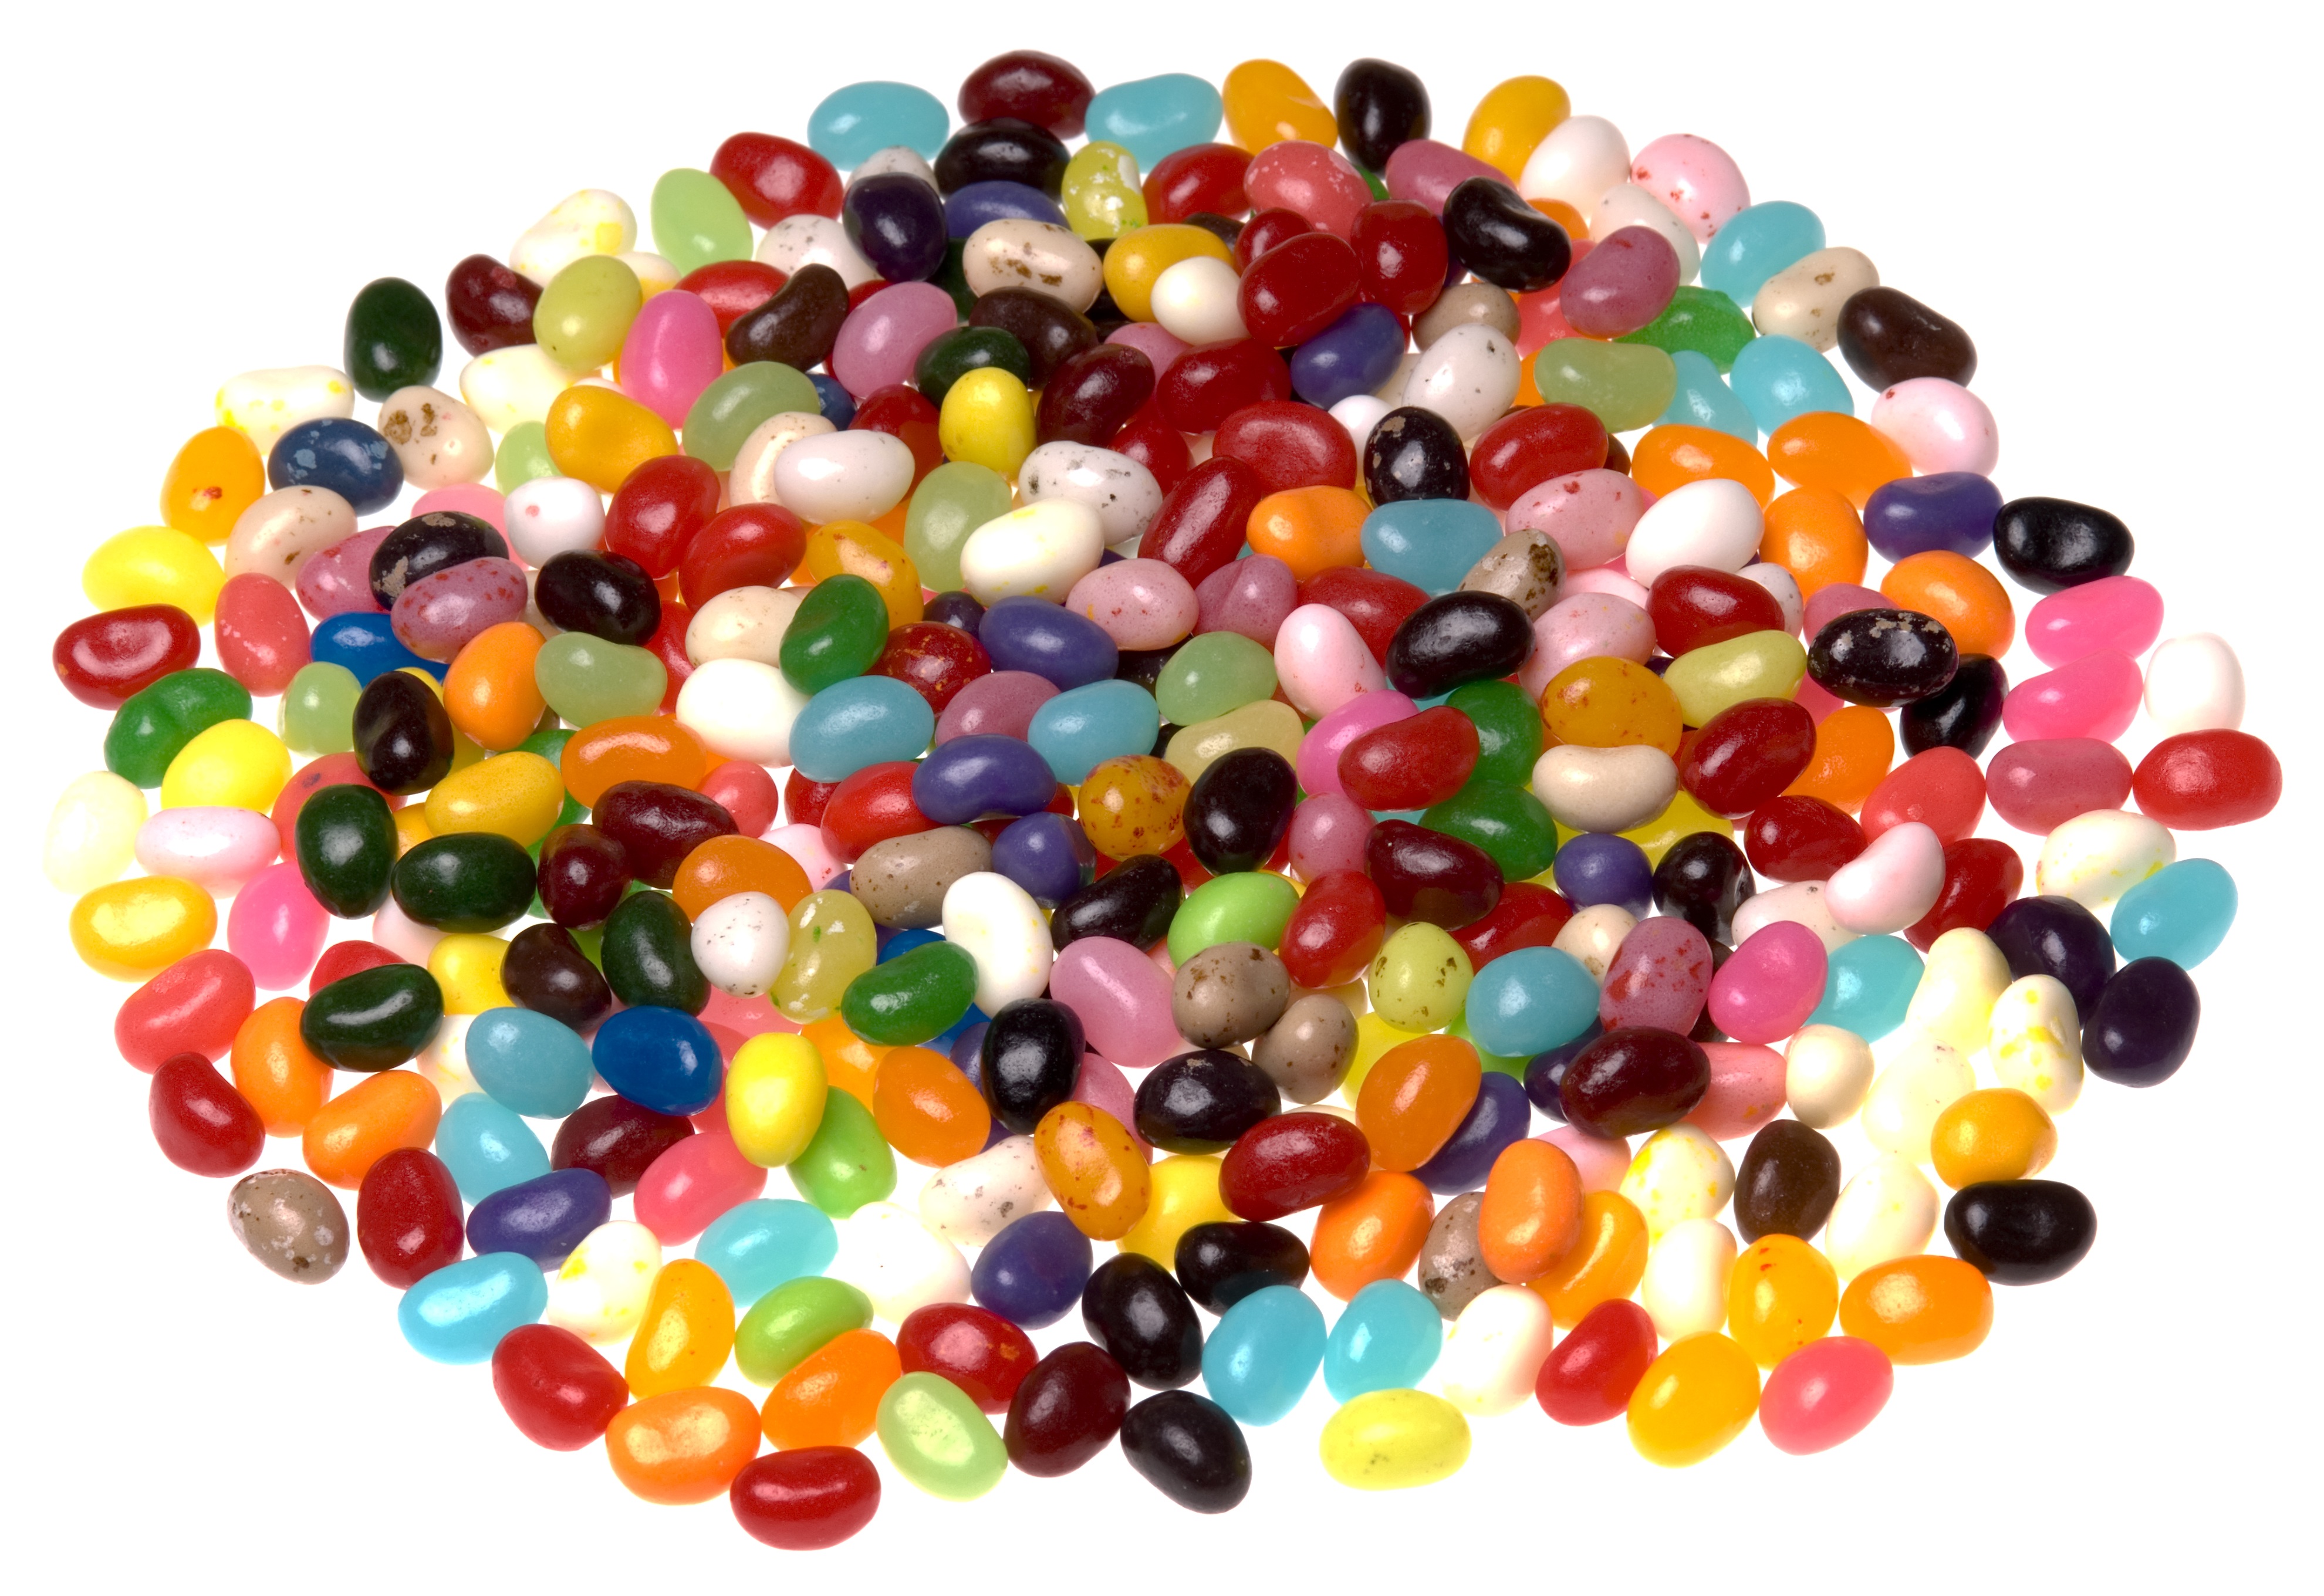 Jelly beans candy photo